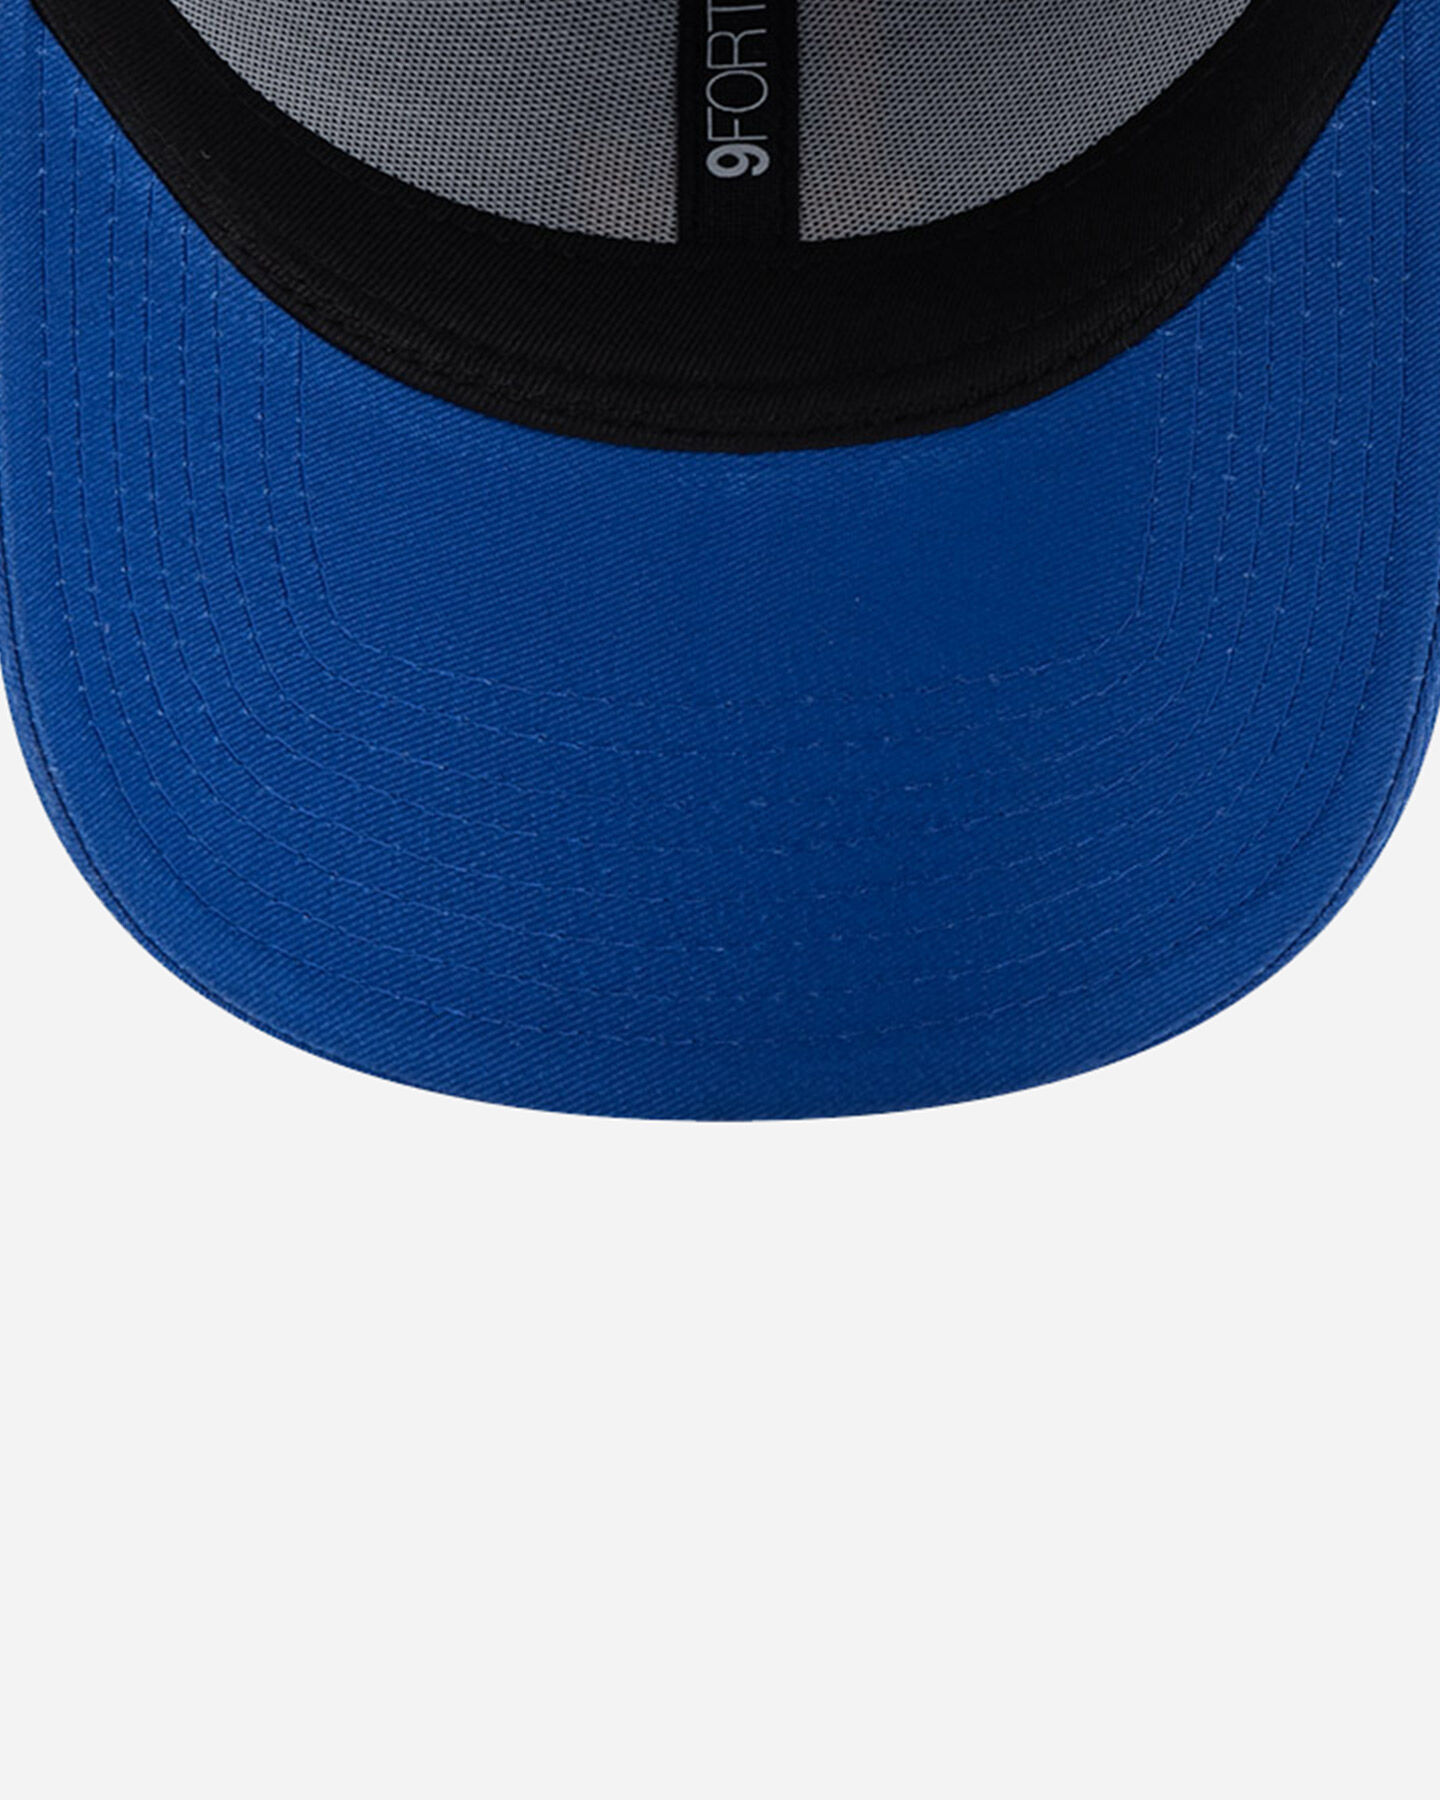  Cappellino NEW ERA 9FORTY MLB LEAGUE LOS ANGELES DODGERS  S5606281|420|OSFM scatto 4